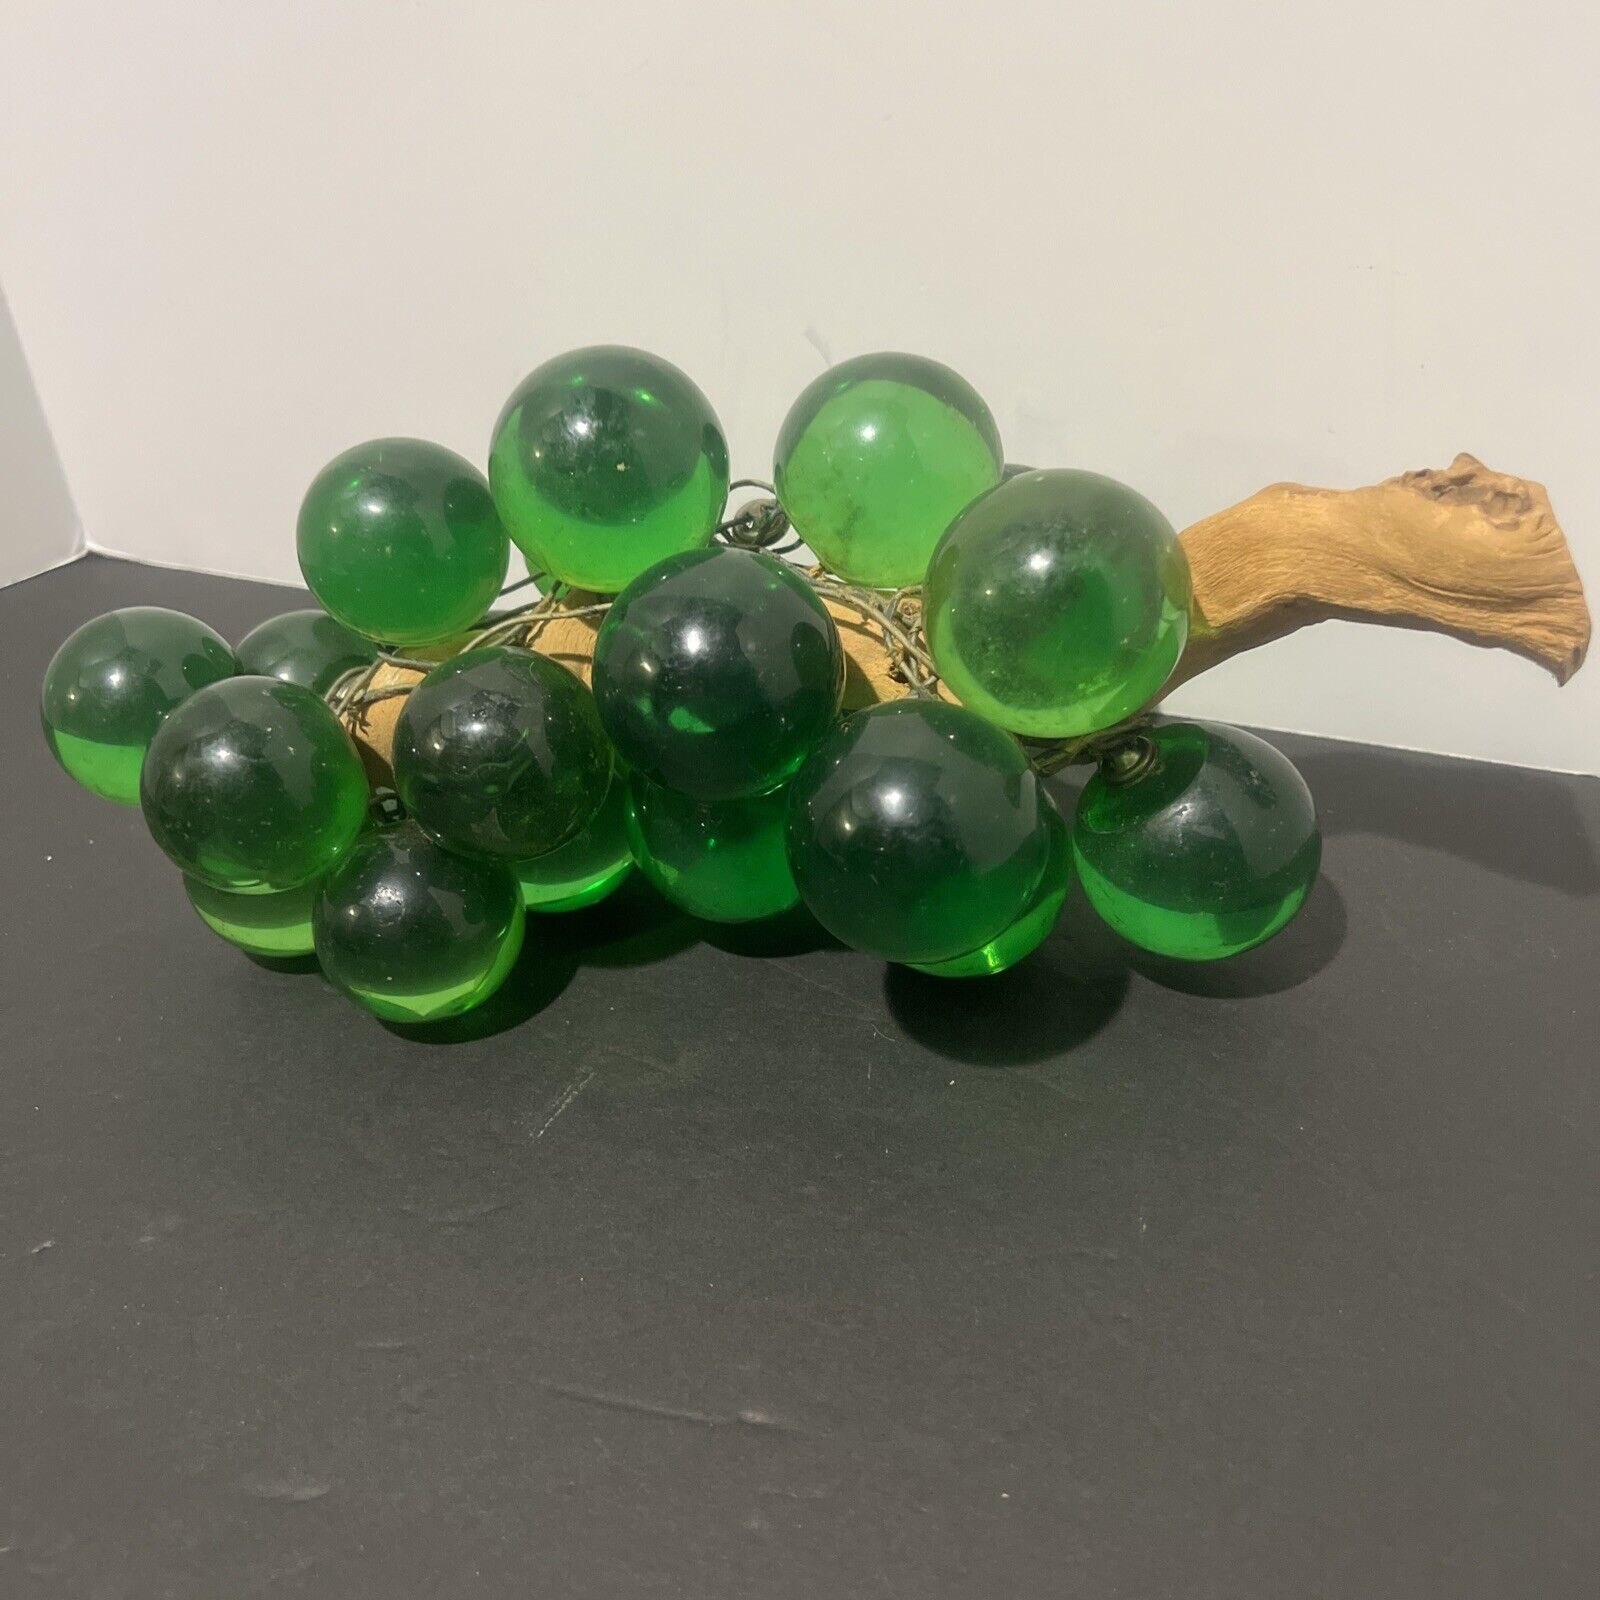 Vintage Lucite Acrylic Green Grapes Driftwood Large Decorative Cluster MCM